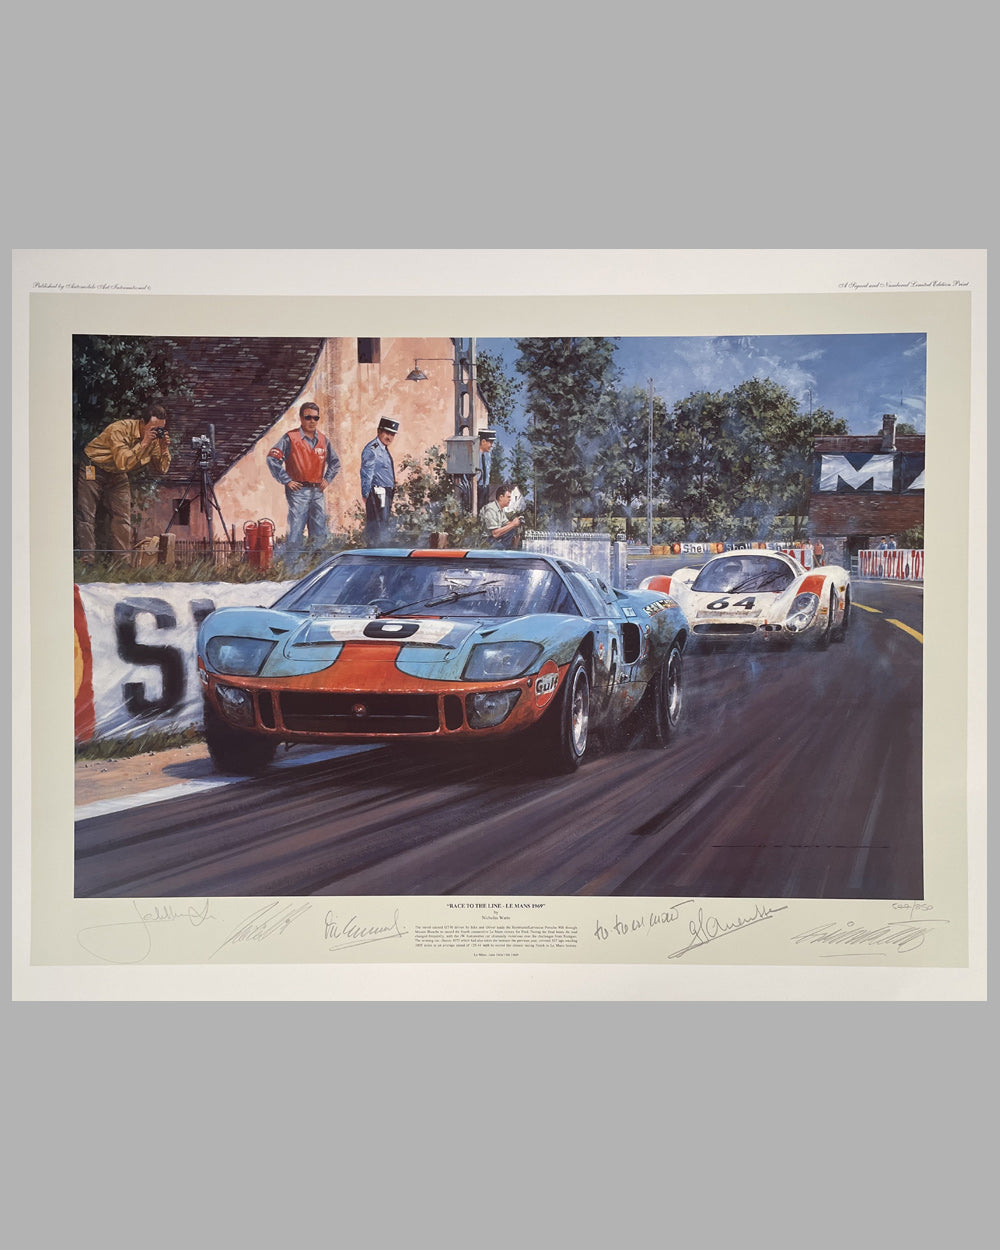 Race to the Line - Le Mans 1969 print by Nicholas Watts, autographed by Ickx, Oliver, Elford, Hermann, and Larousse